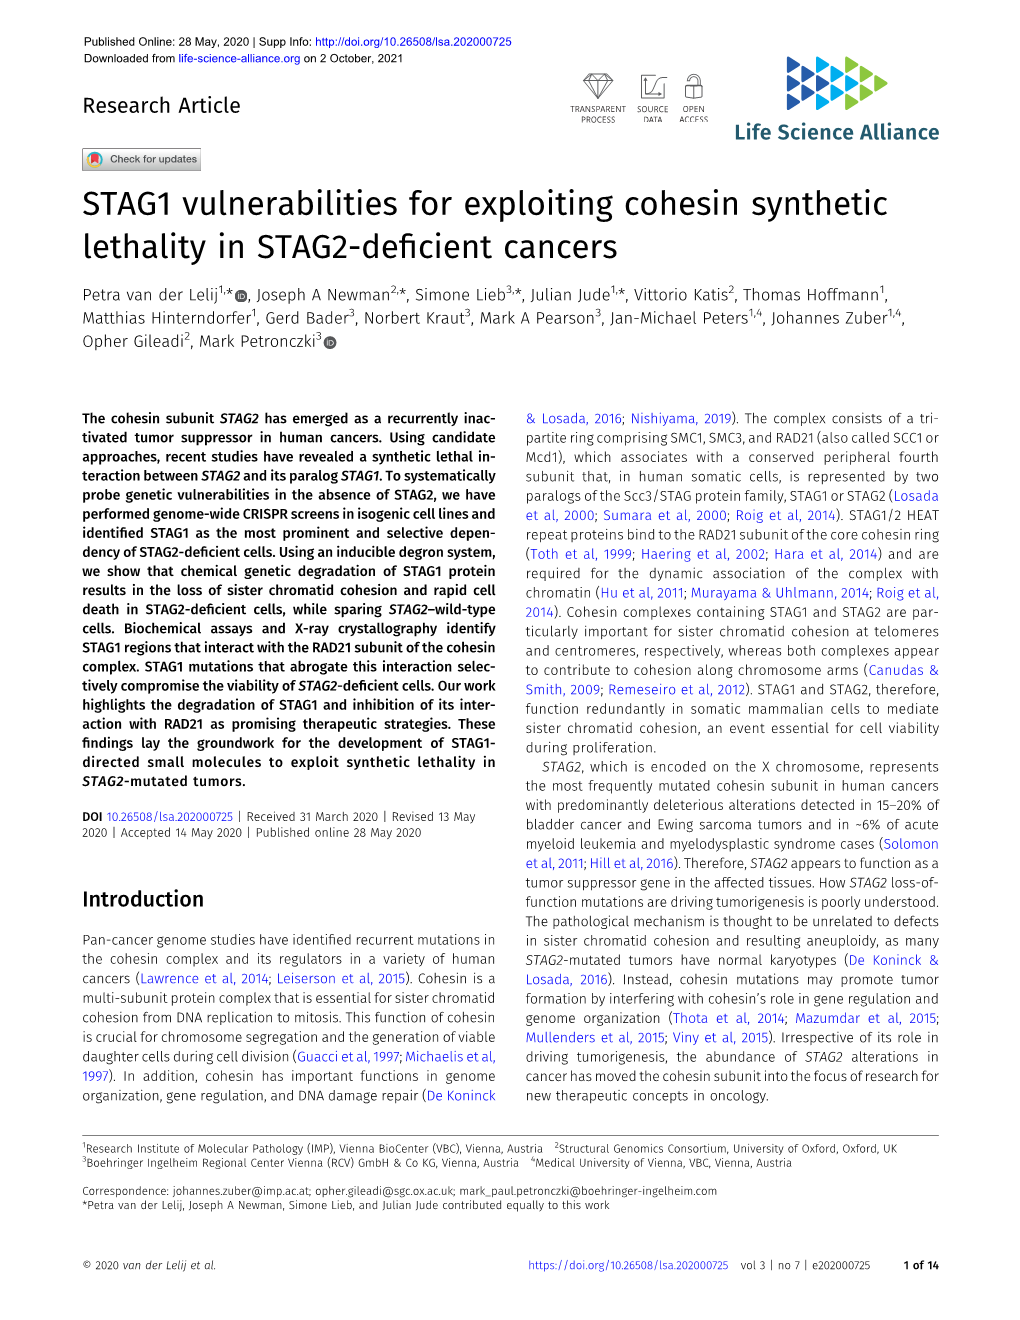 STAG1 Vulnerabilities for Exploiting Cohesin Synthetic Lethality in STAG2-Deﬁcient Cancers